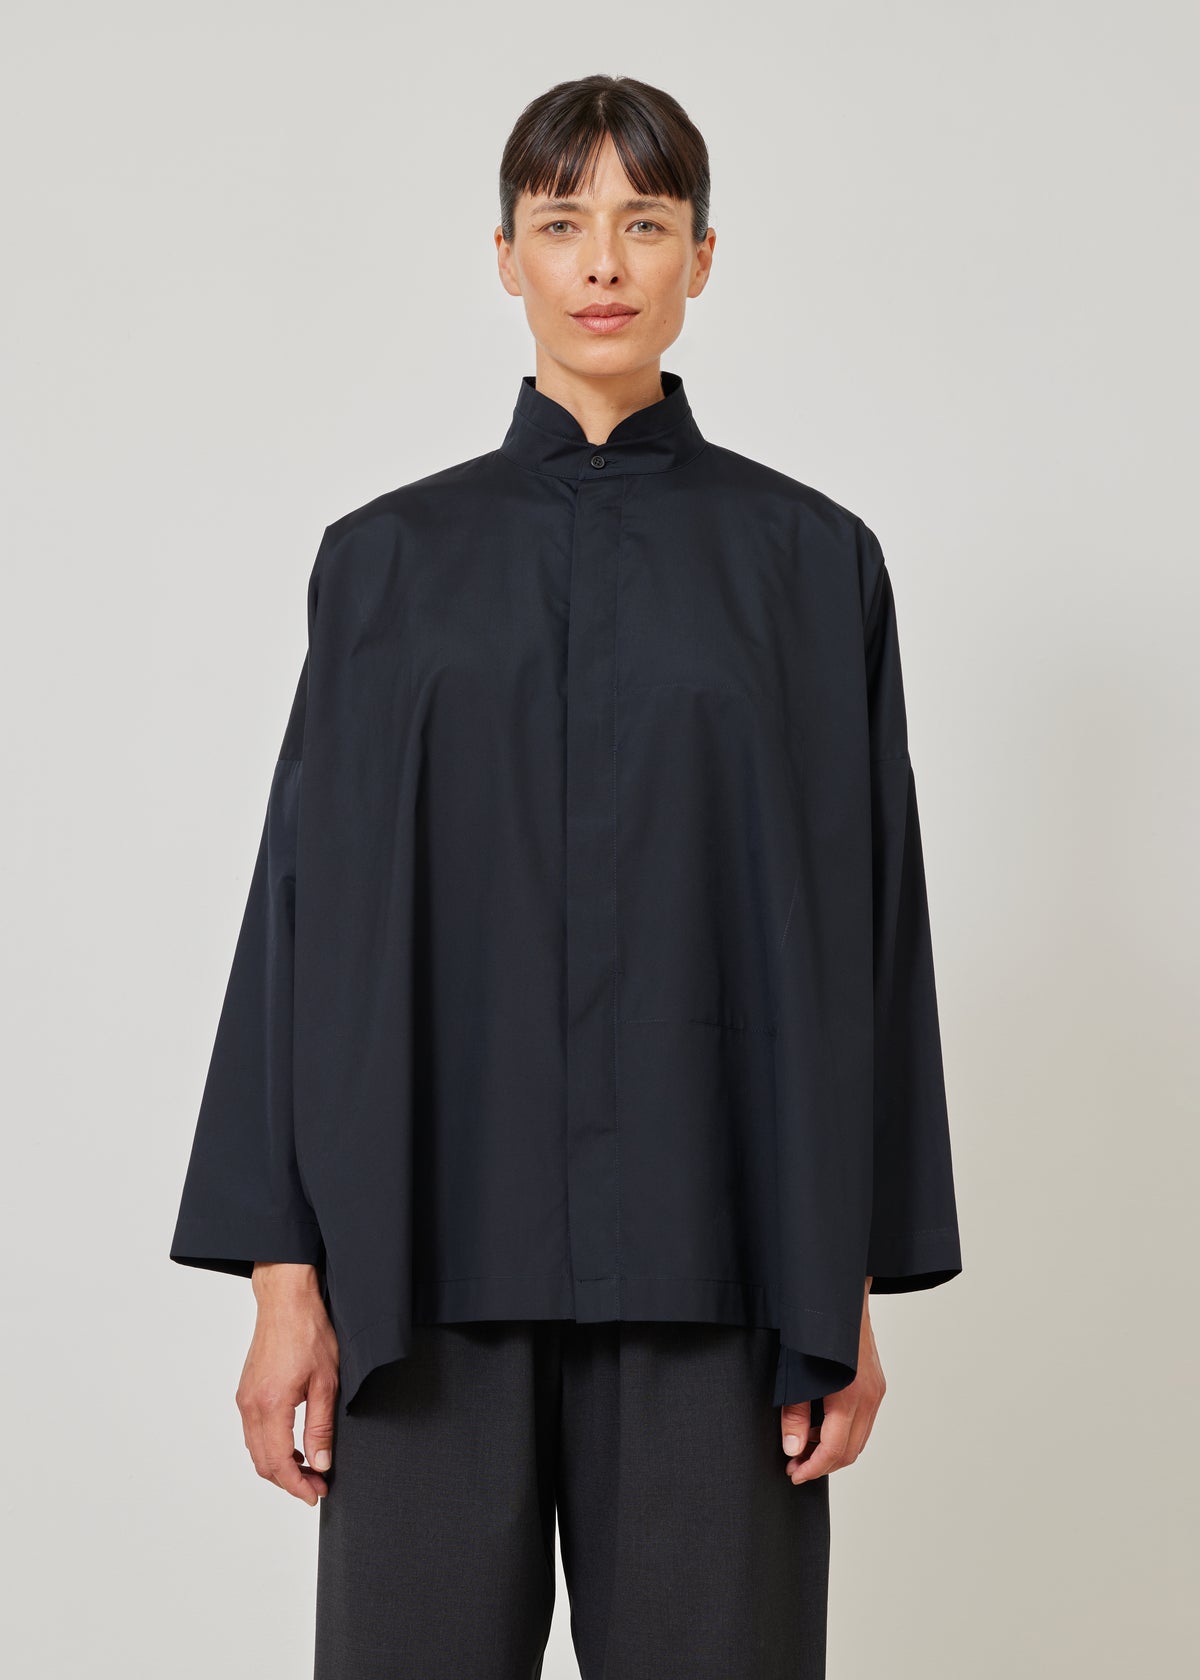 wide double stand collar shirt with hidden pocket - long